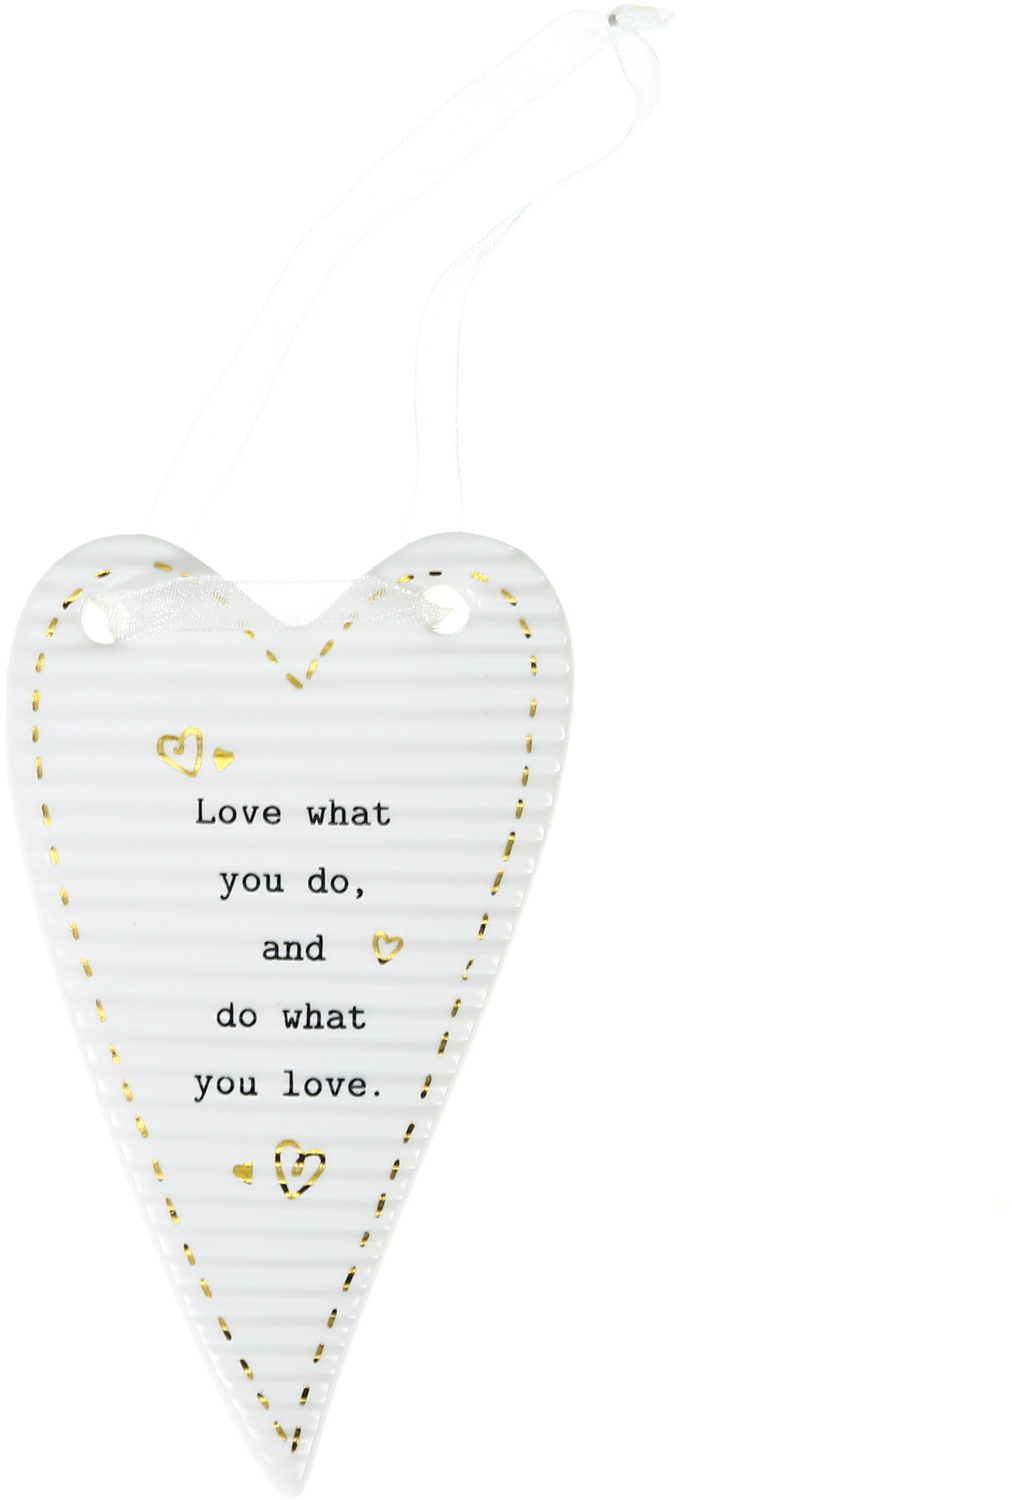 Do What You Love by Thoughtful Words - Do What You Love - 4" Hanging Heart Plaque